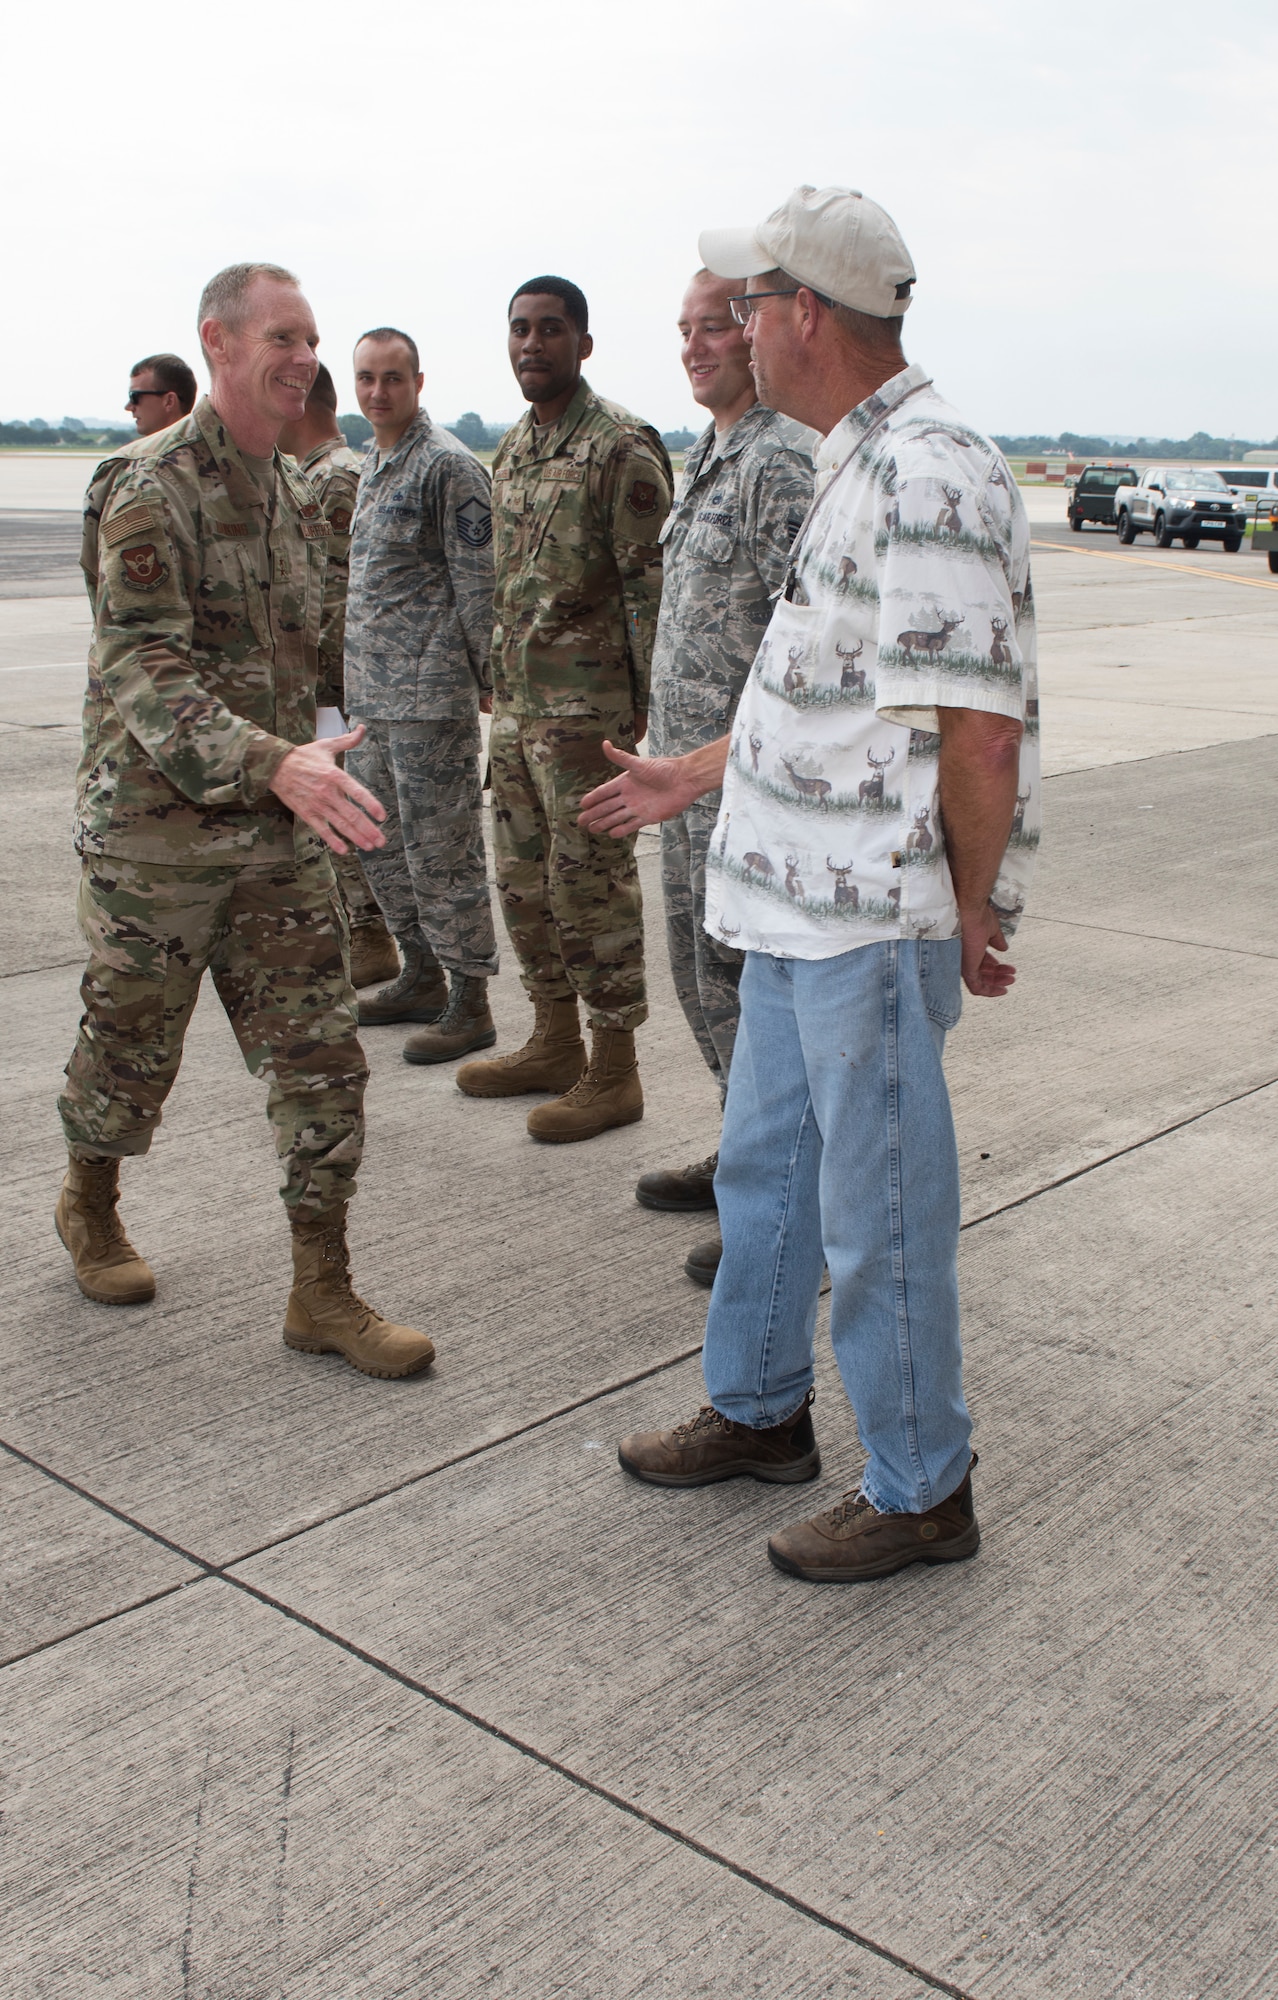 Major General James Dawkins Jr., Eighth Air Force commander, greets Michael Beaumeister, Air Force engineering and technical services representative assigned to Whiteman Air Force Base Missouri, on August 27, 2019, at Royal Air Force Fairford, England. Members of Team Whiteman, along with along strategic partners have deployed as part of a Bomber Task Force to the European Command area of operations to conduct theater integration and flying training. (U.S. Air Force photo by Staff Sgt. Kayla White)